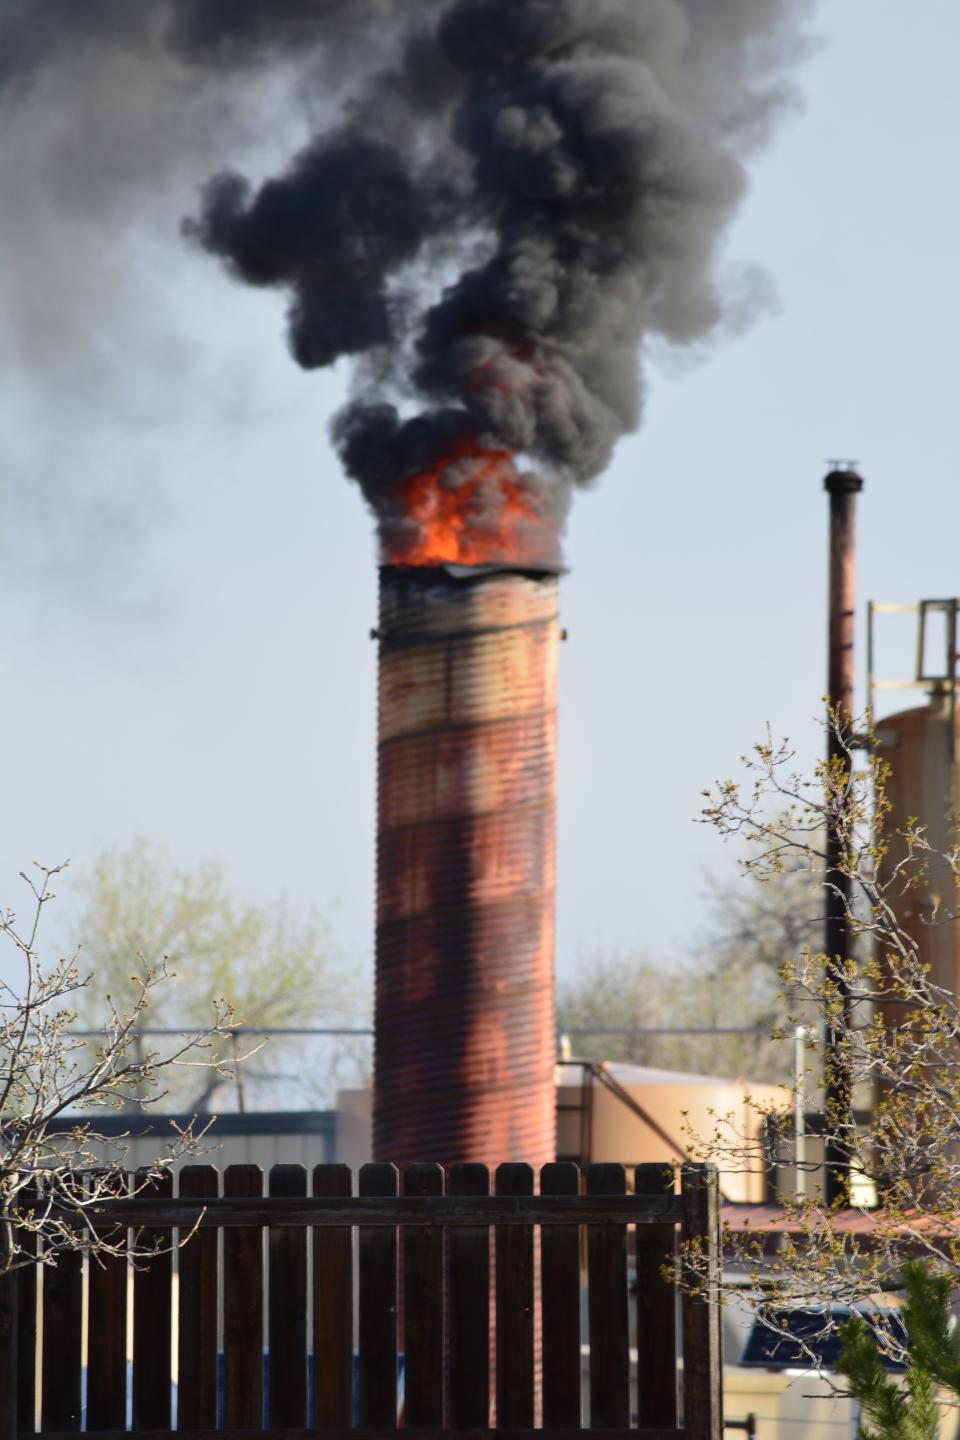 A fire broke out at Prospect Energy's Fort Collins Meyer tank battery site near the Hearthfire neighborhood north of Fort Collins on May 9.